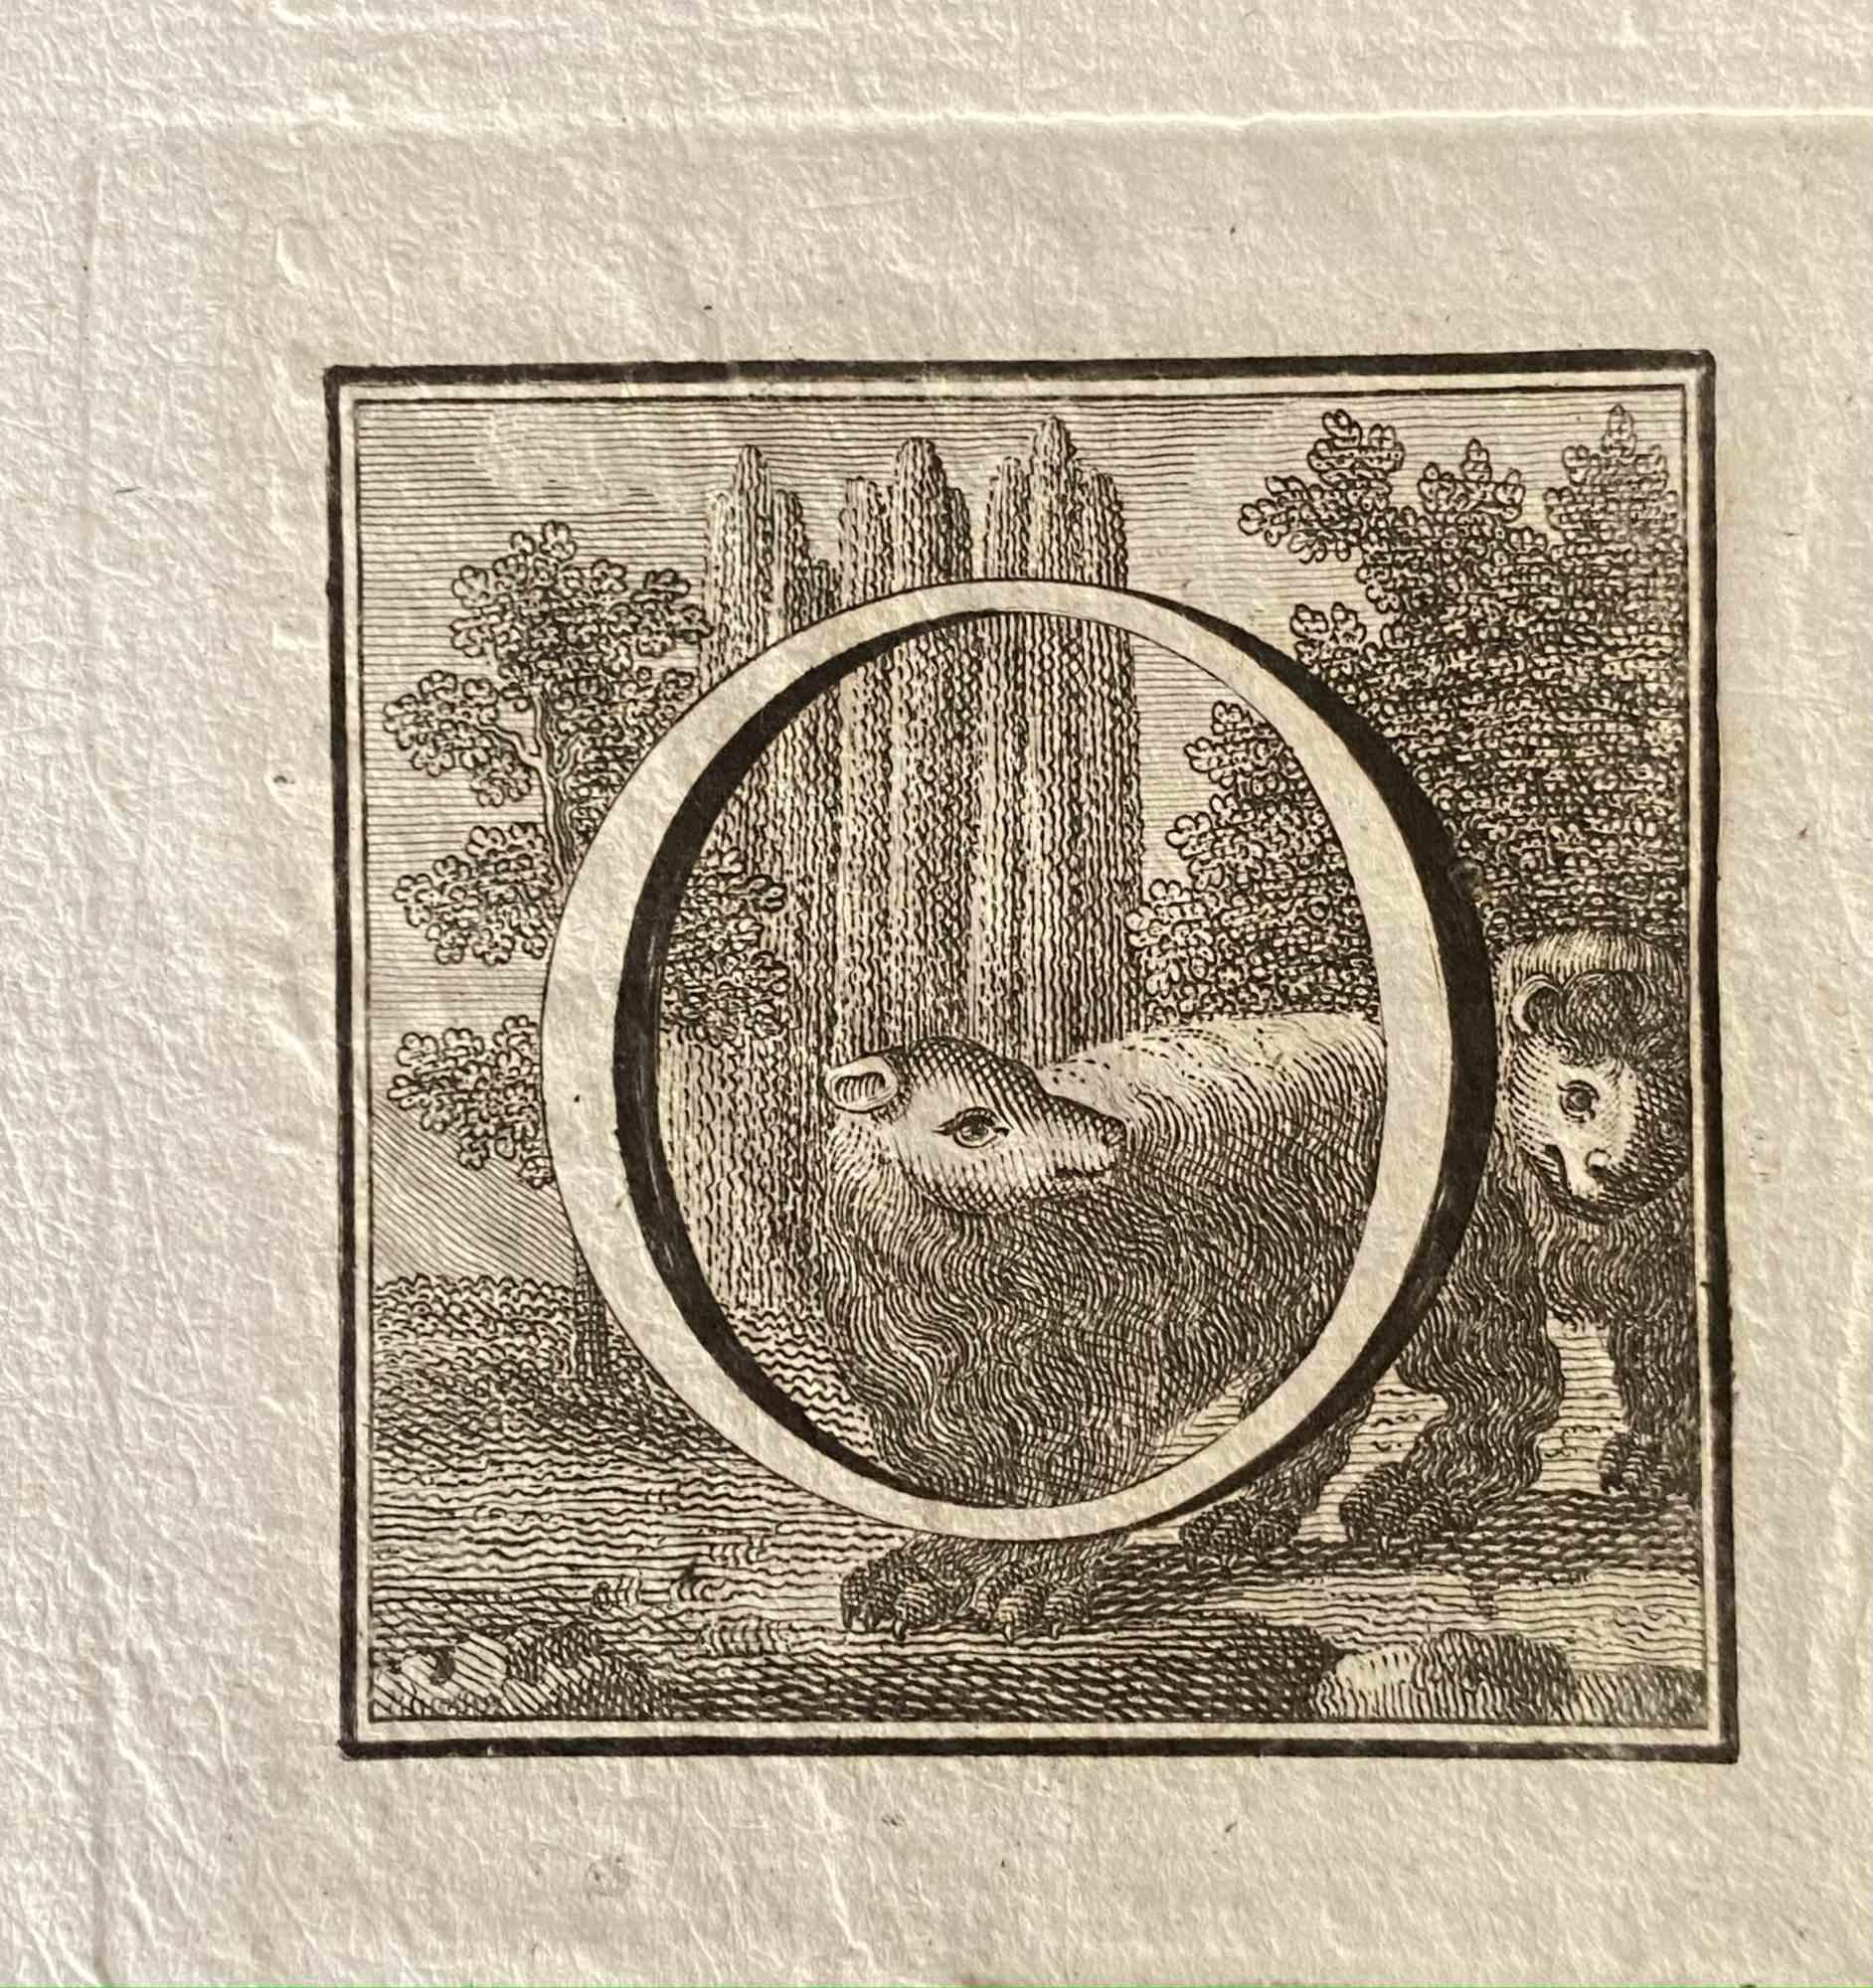 Unknown Figurative Print - Capital Letter for Antiquities of Herculaneum Exposed - End of 18th century